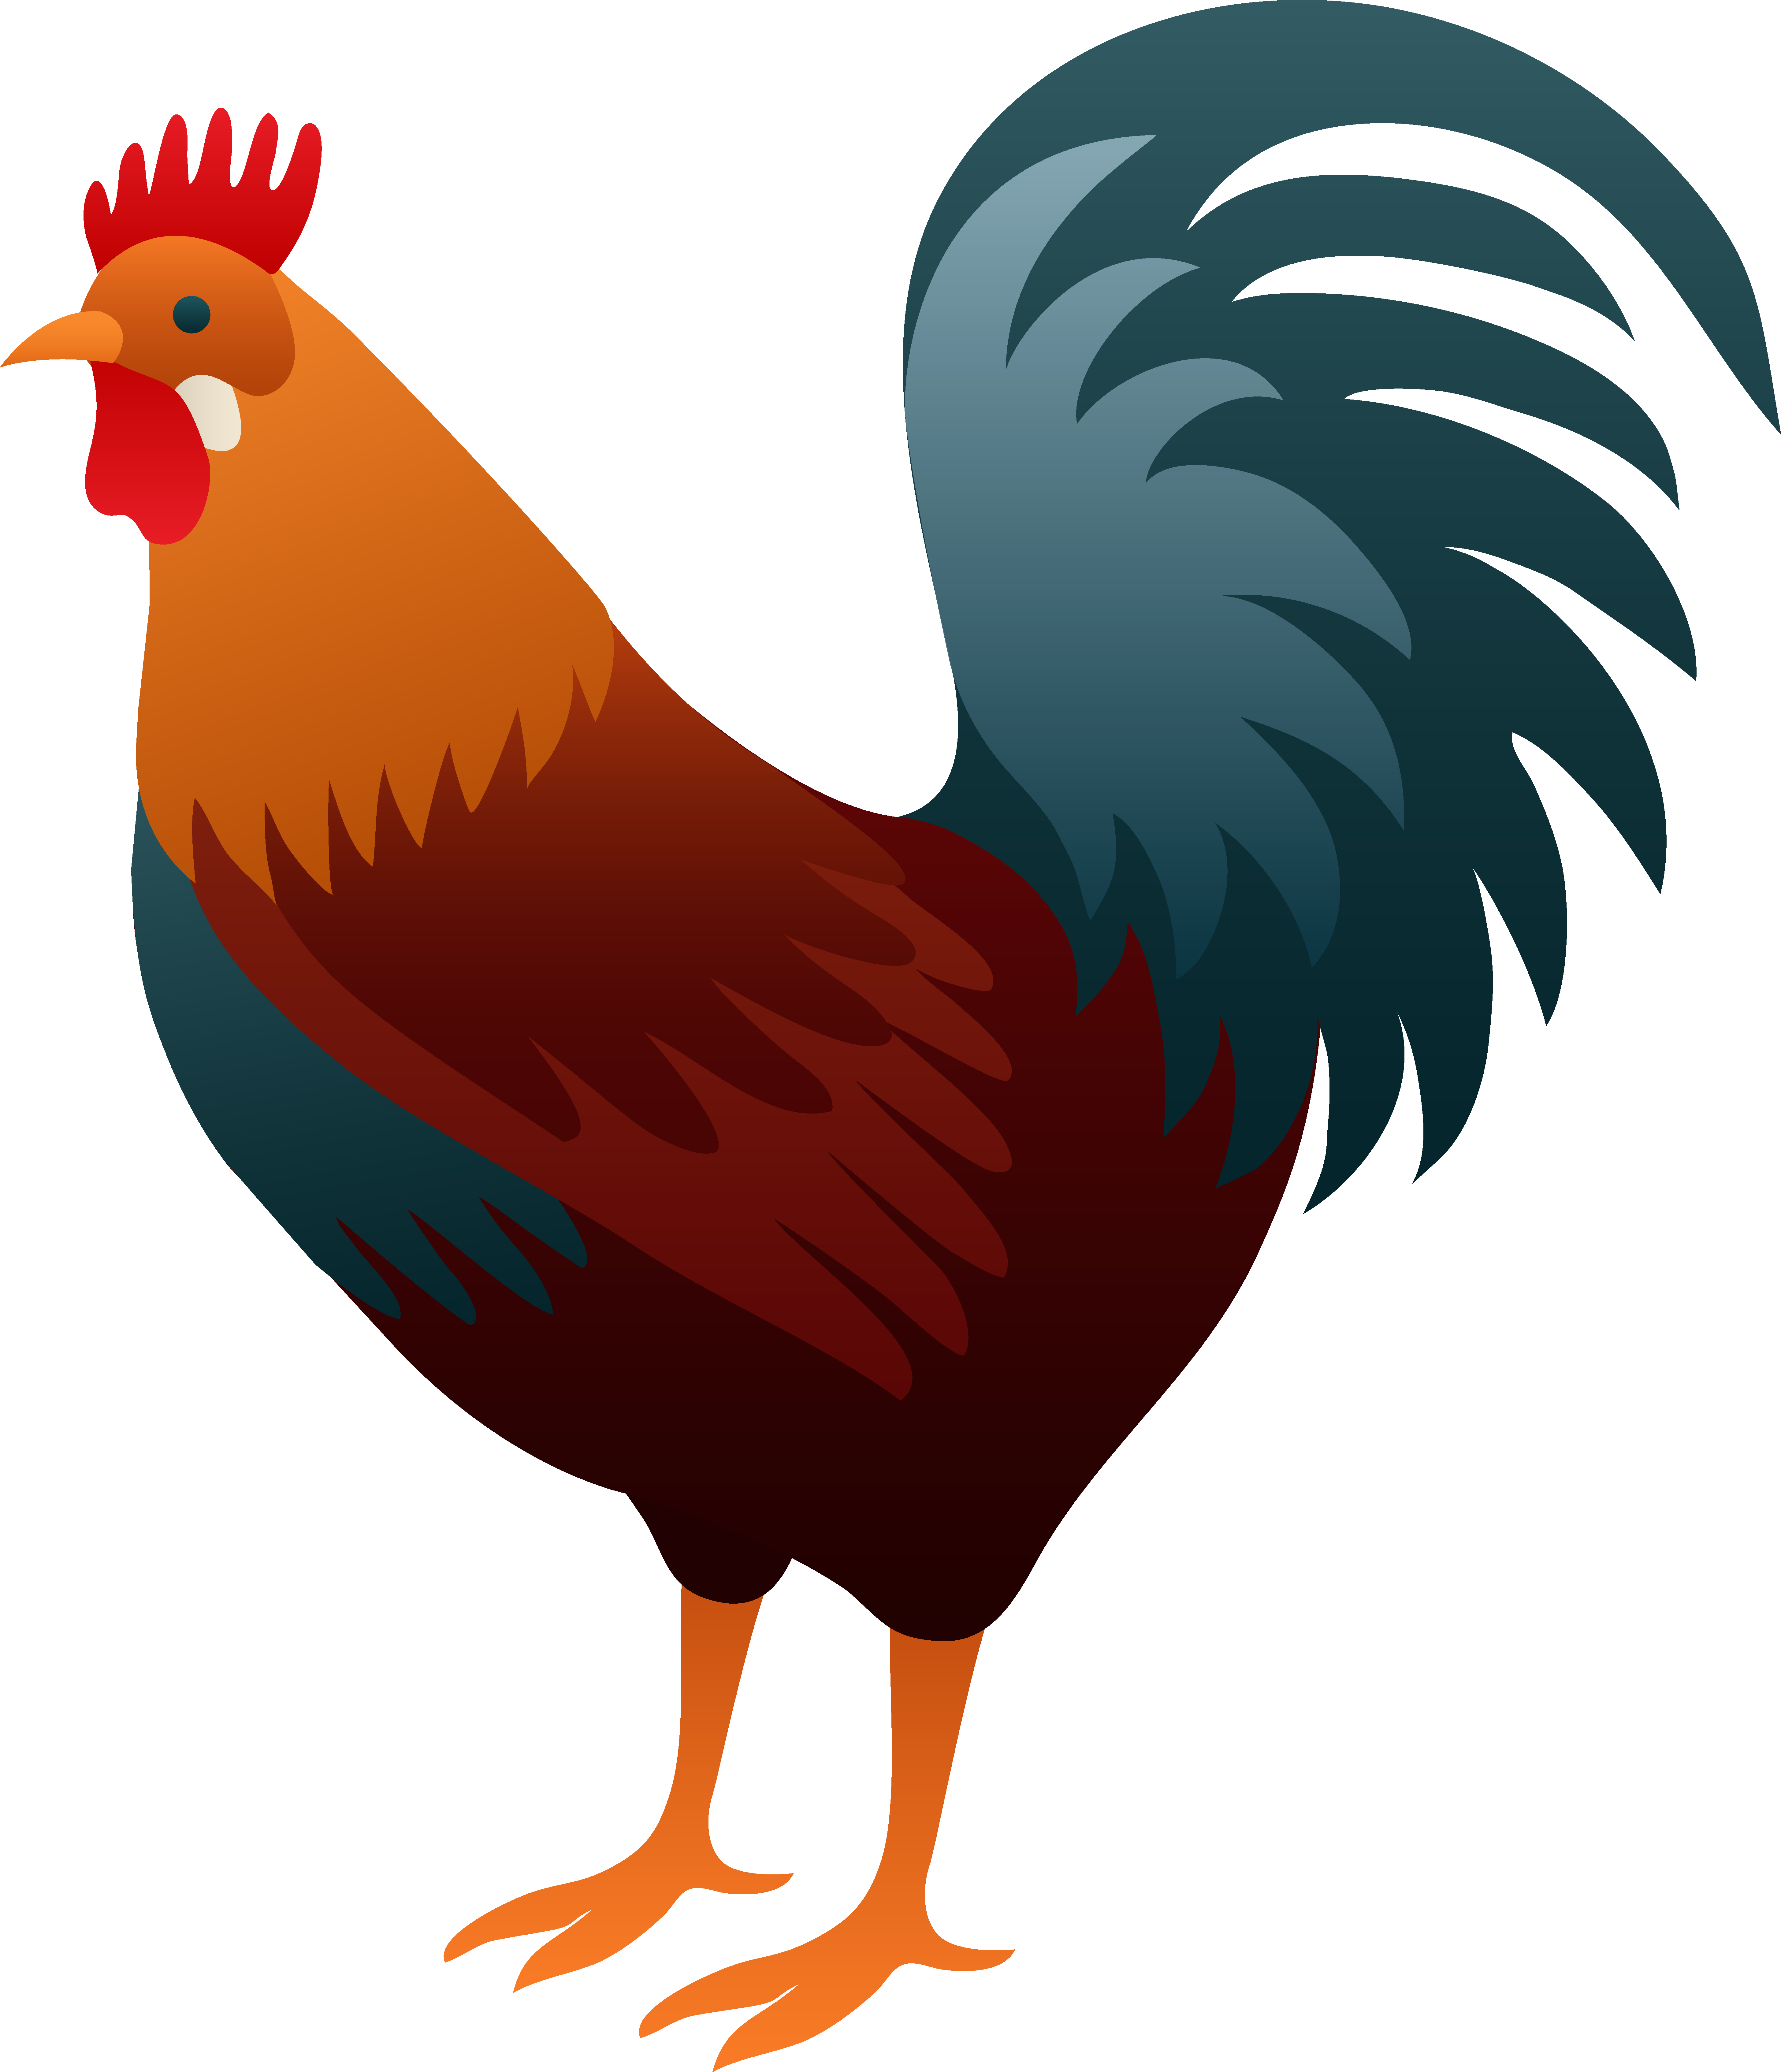 Crowing Rooster Clip Art.